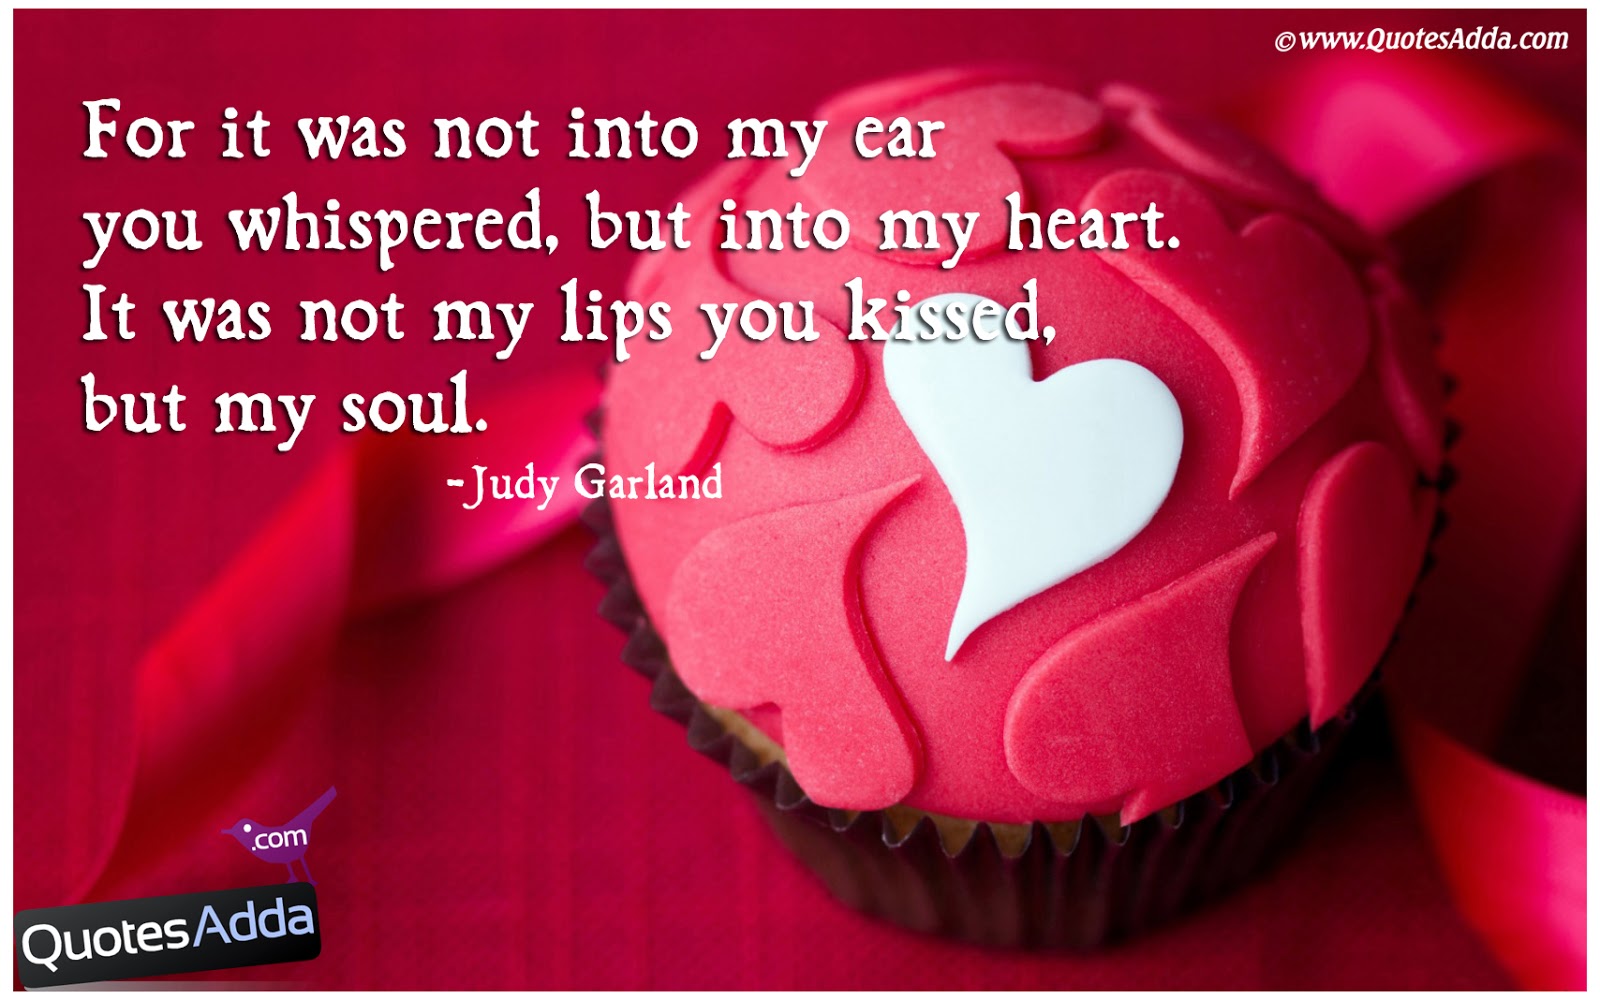 Quotes About Valentines Day. QuotesGram1600 x 1000